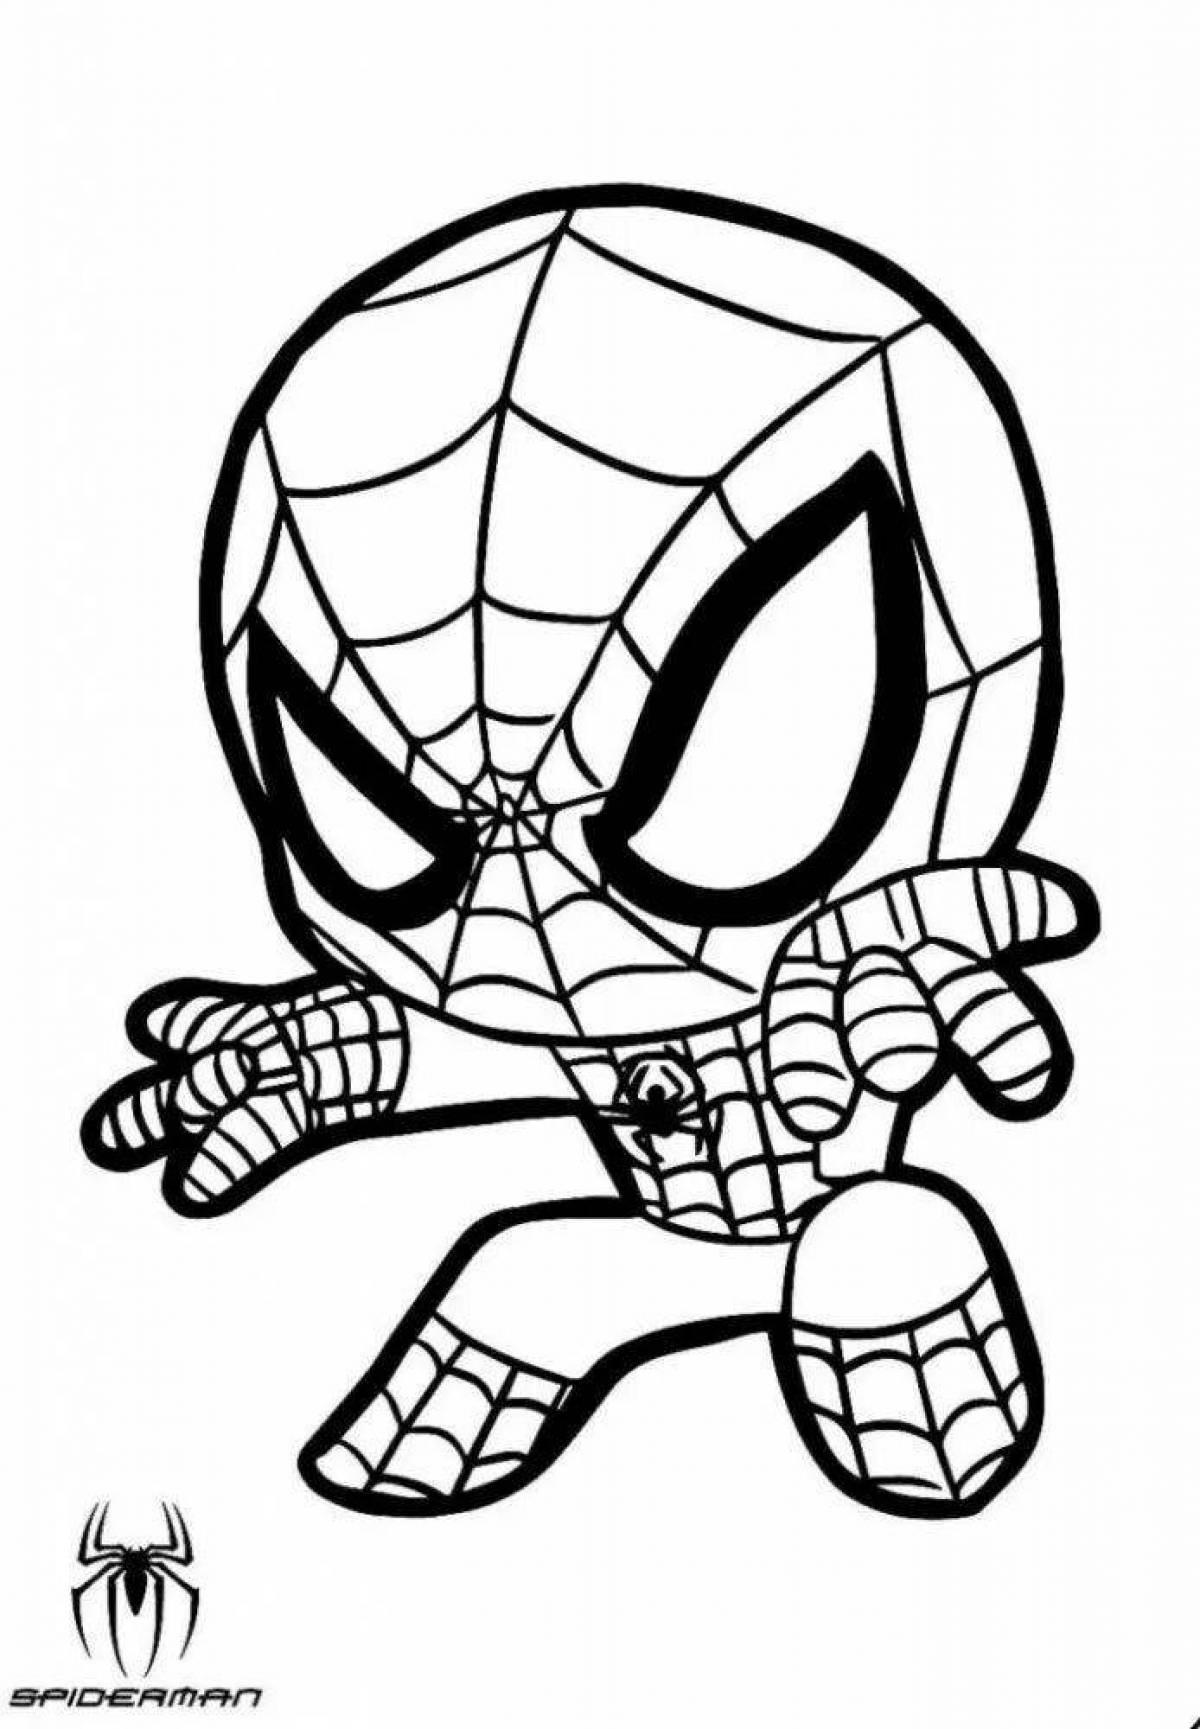 Amazing Spiderman coloring pages for kids